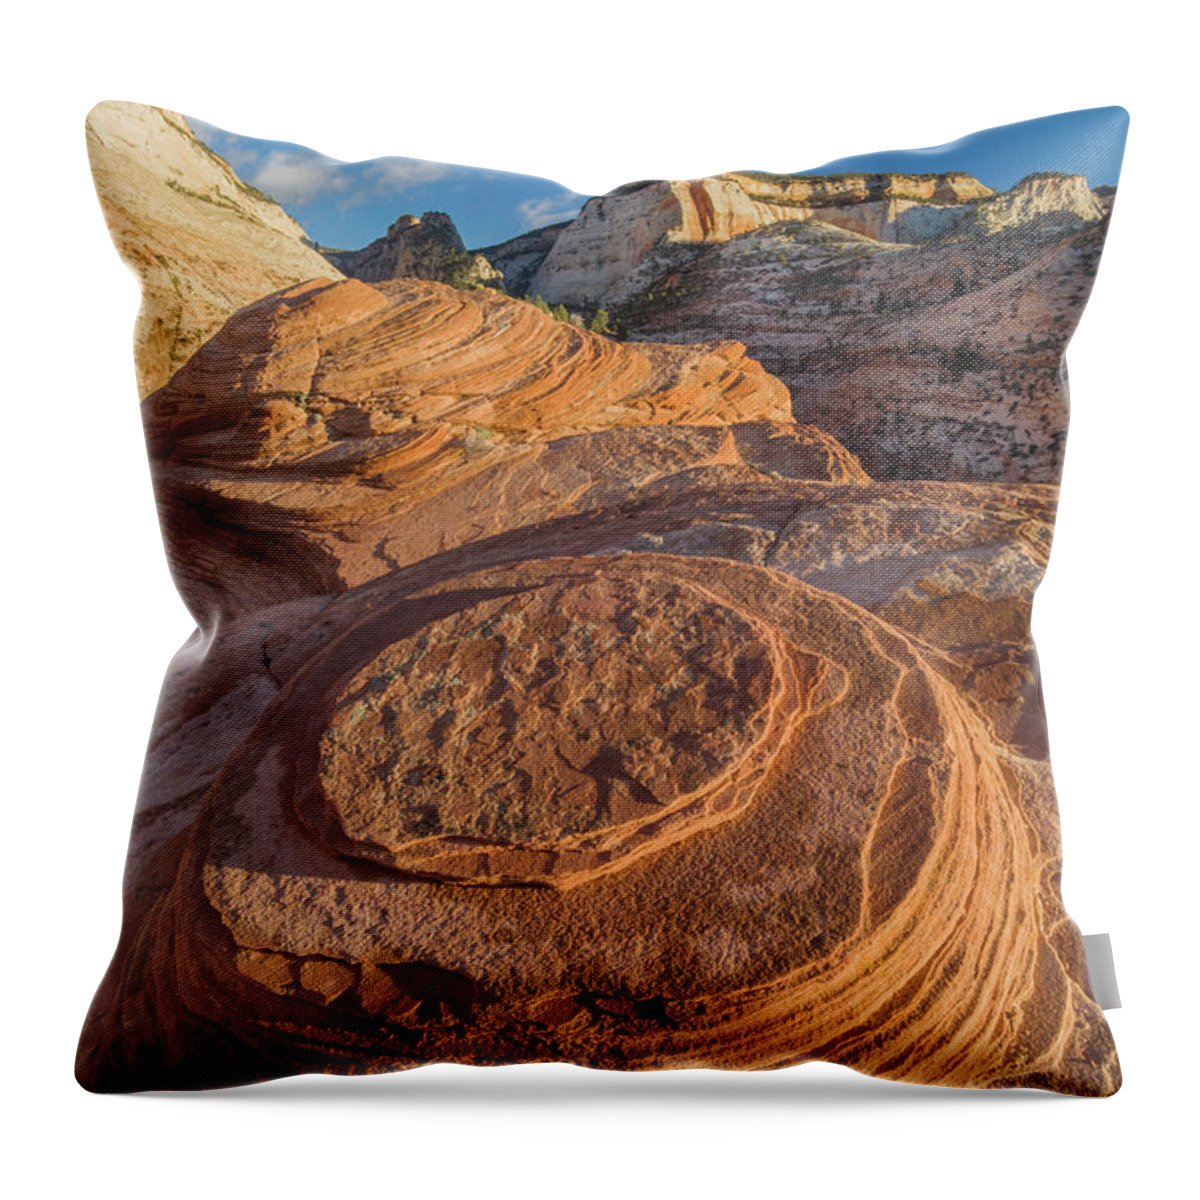 Jeff Foott Throw Pillow featuring the photograph Sandstone Formations In Zion Natl Park by Jeff Foott